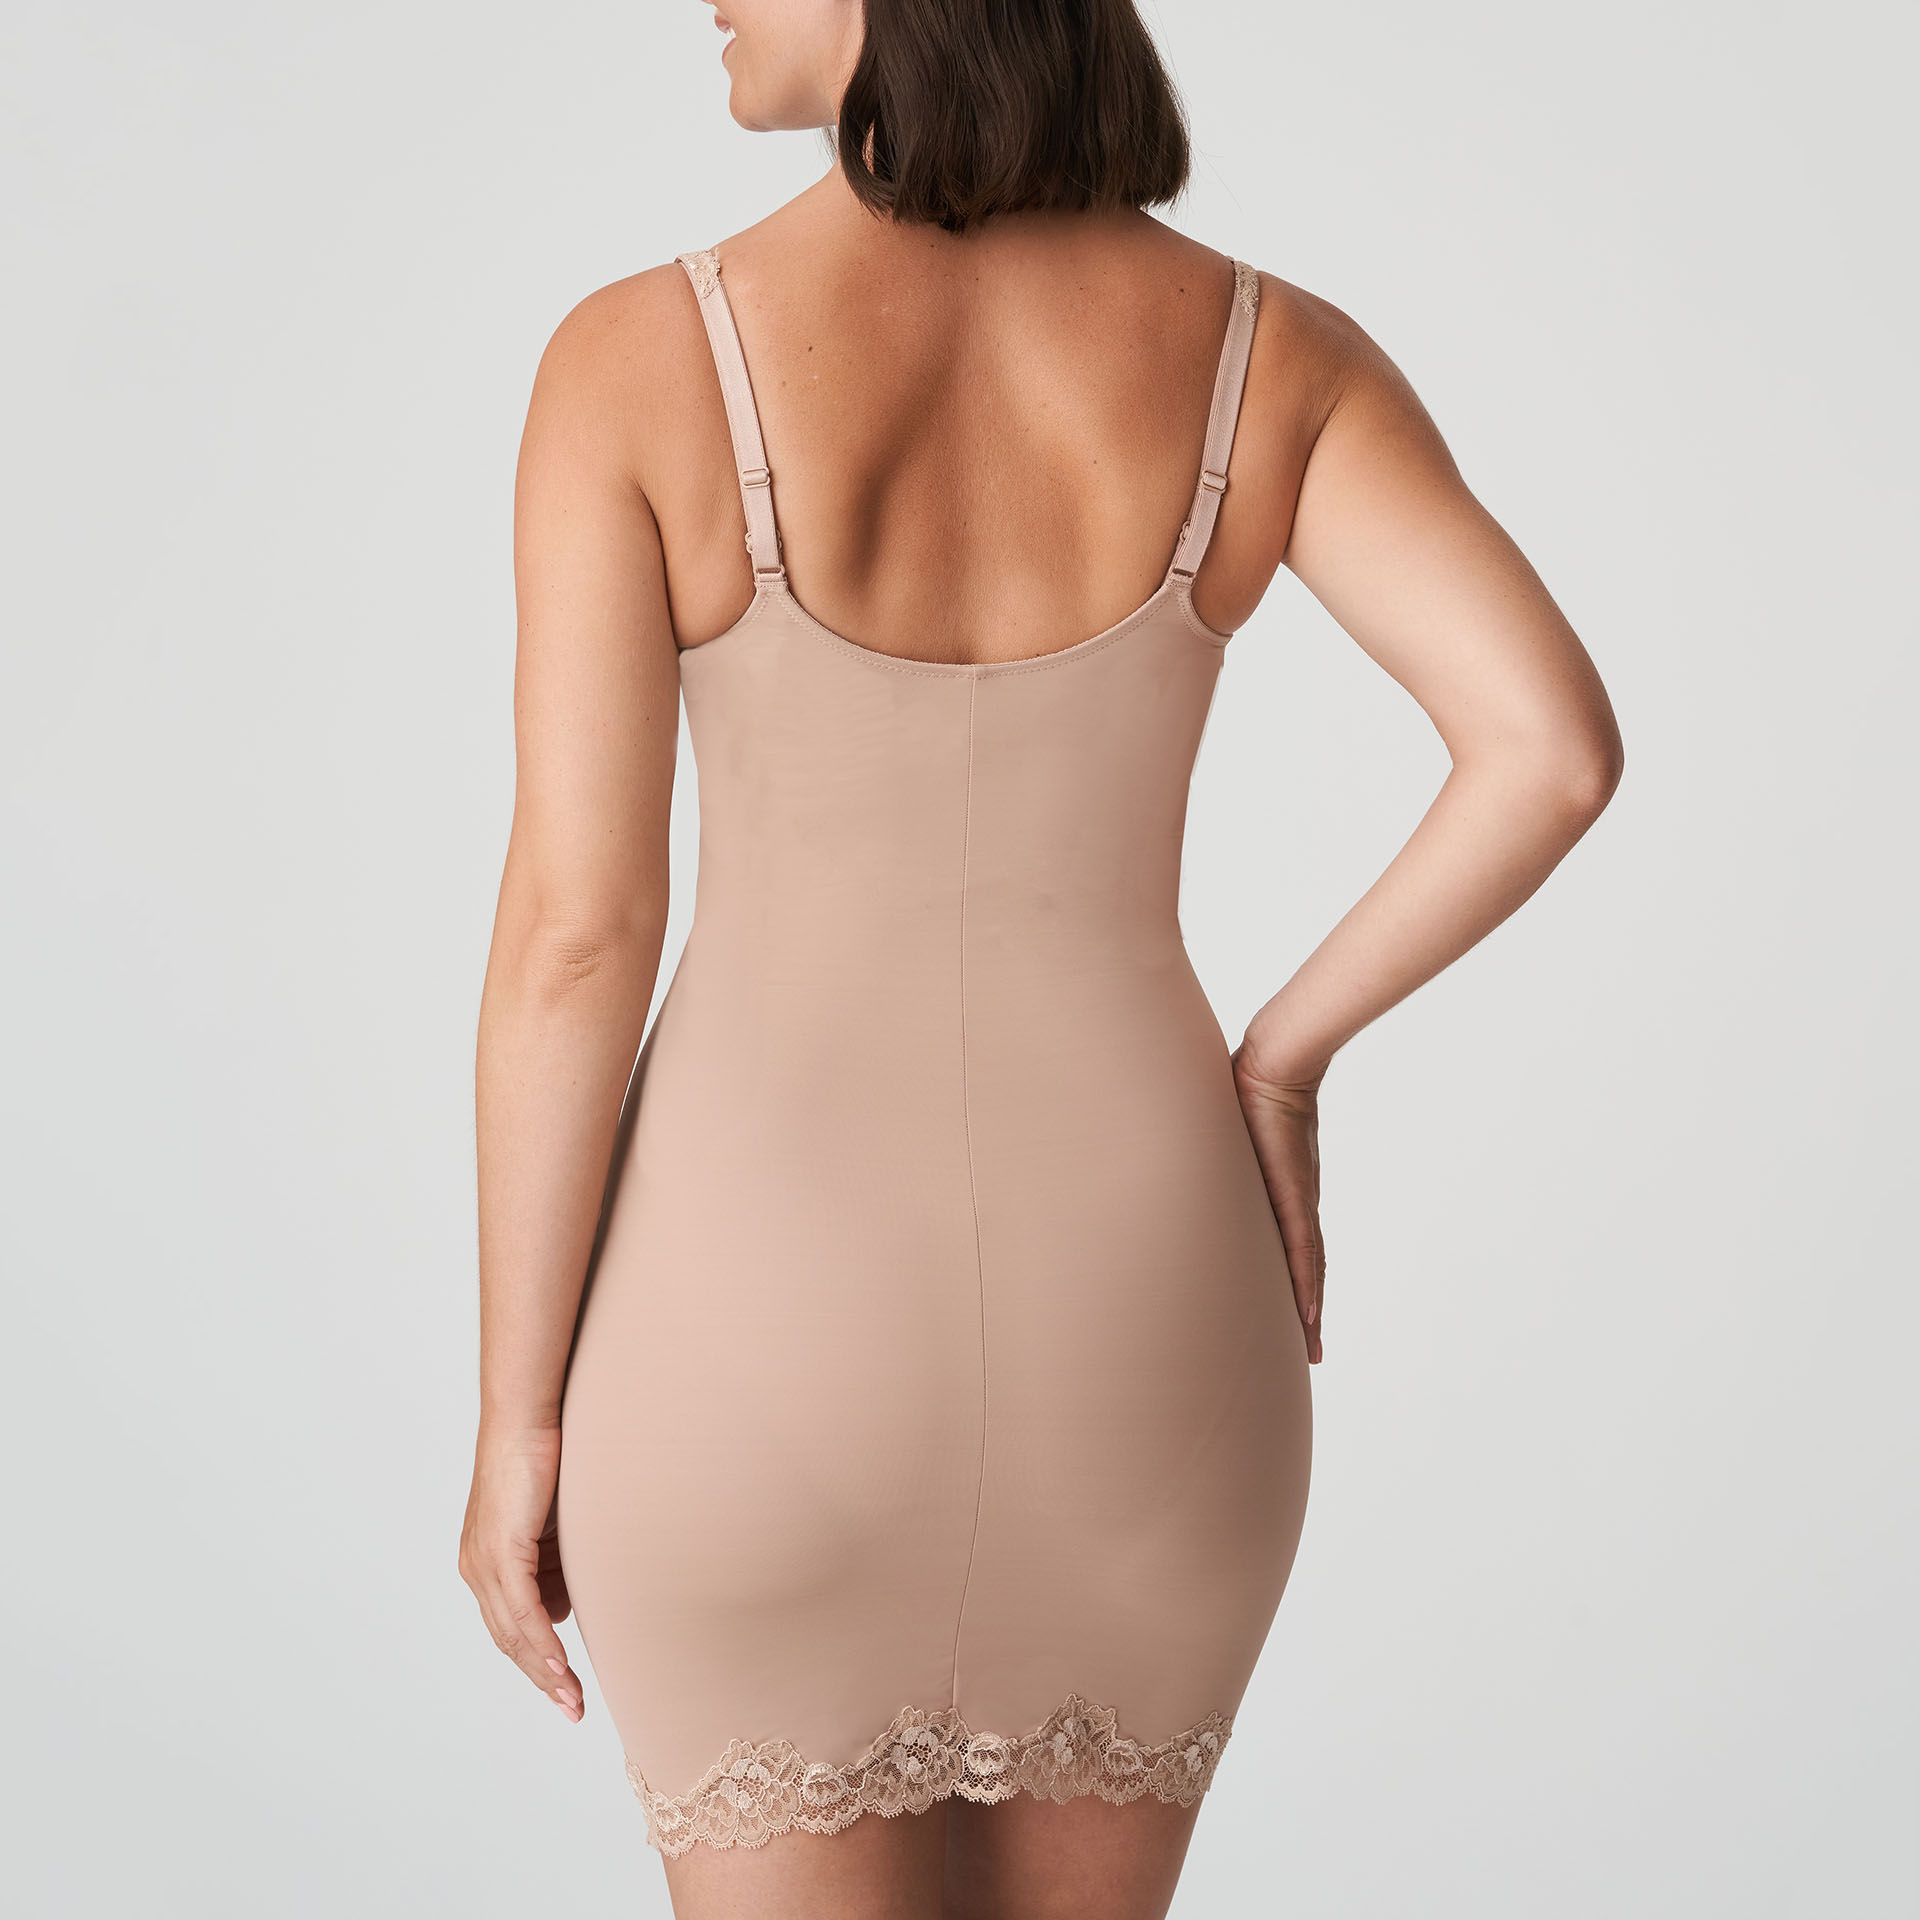 PrimaDonna COUTURE cream shapewear dress with briefs